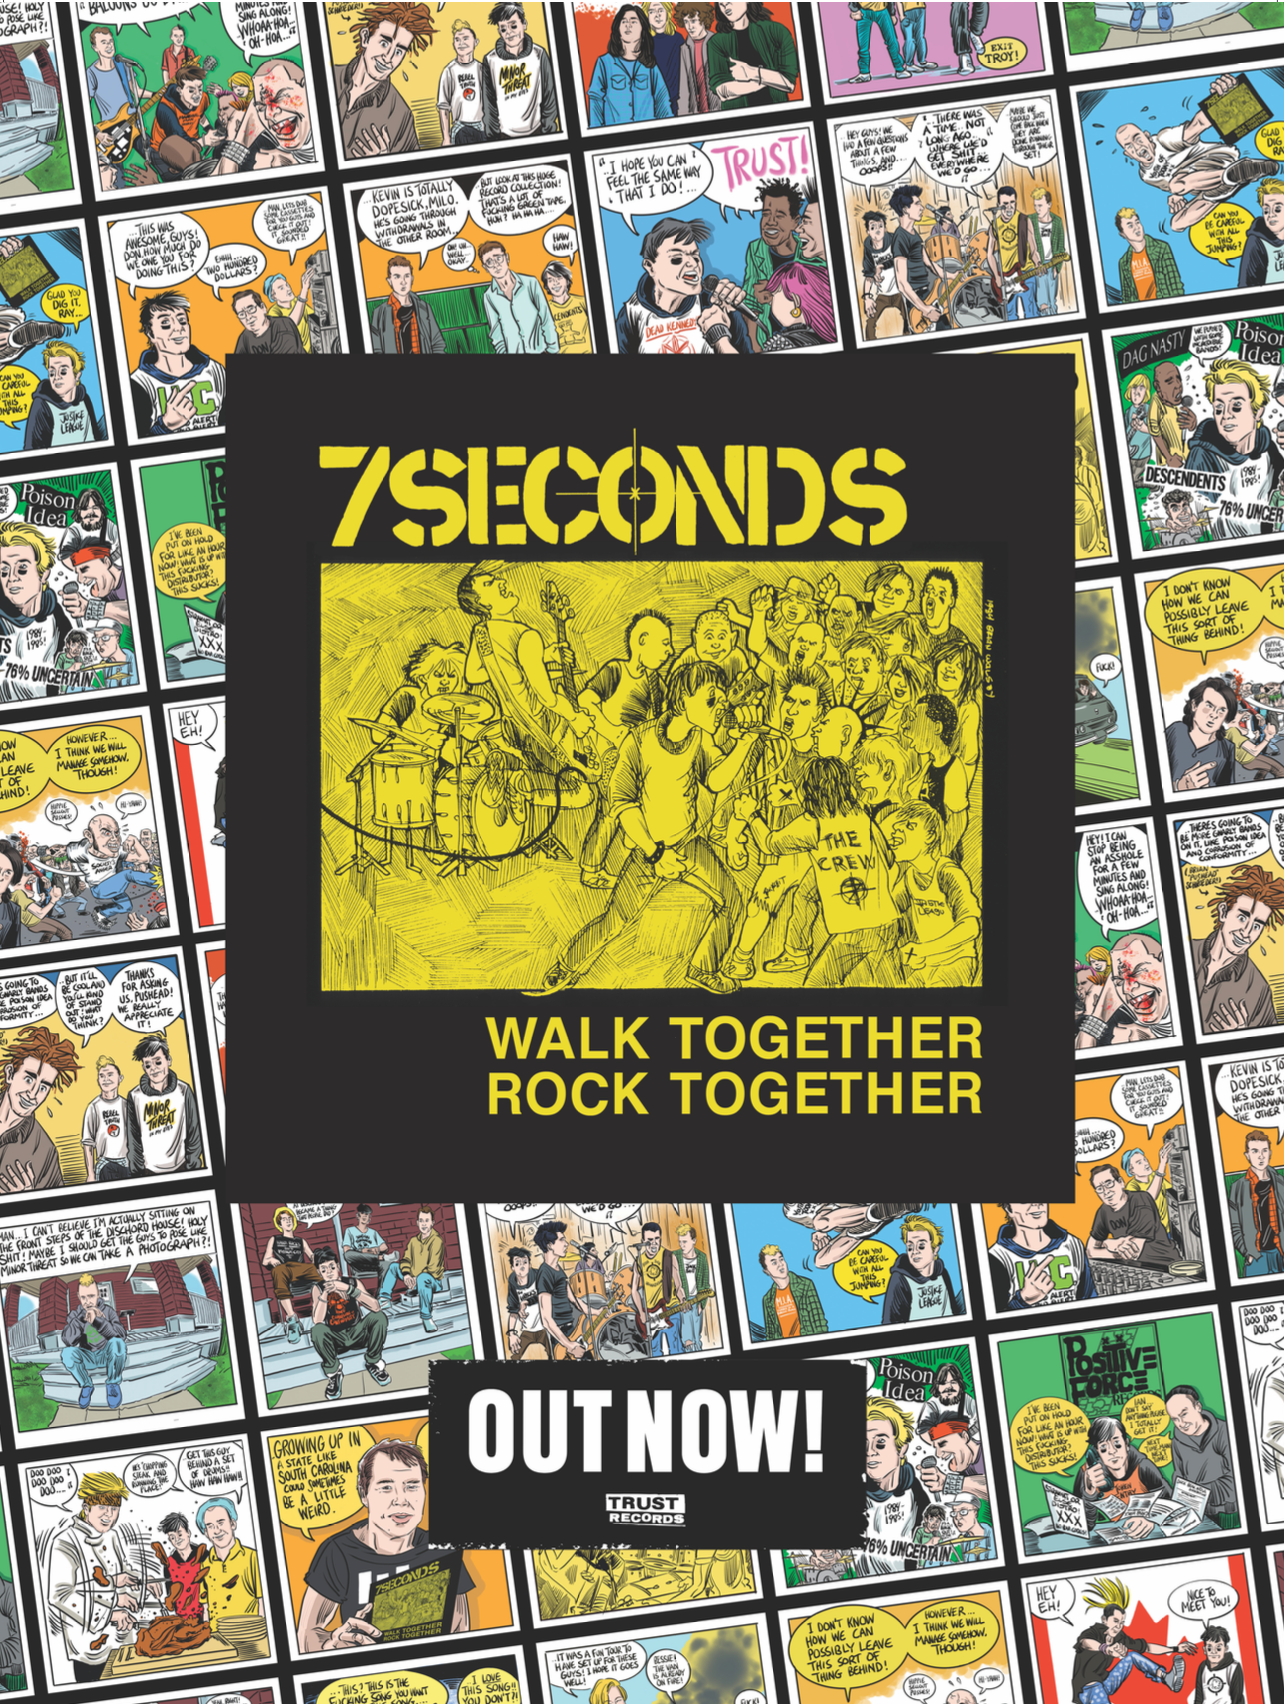 Walk Together, Rock Together - Trust Records Company